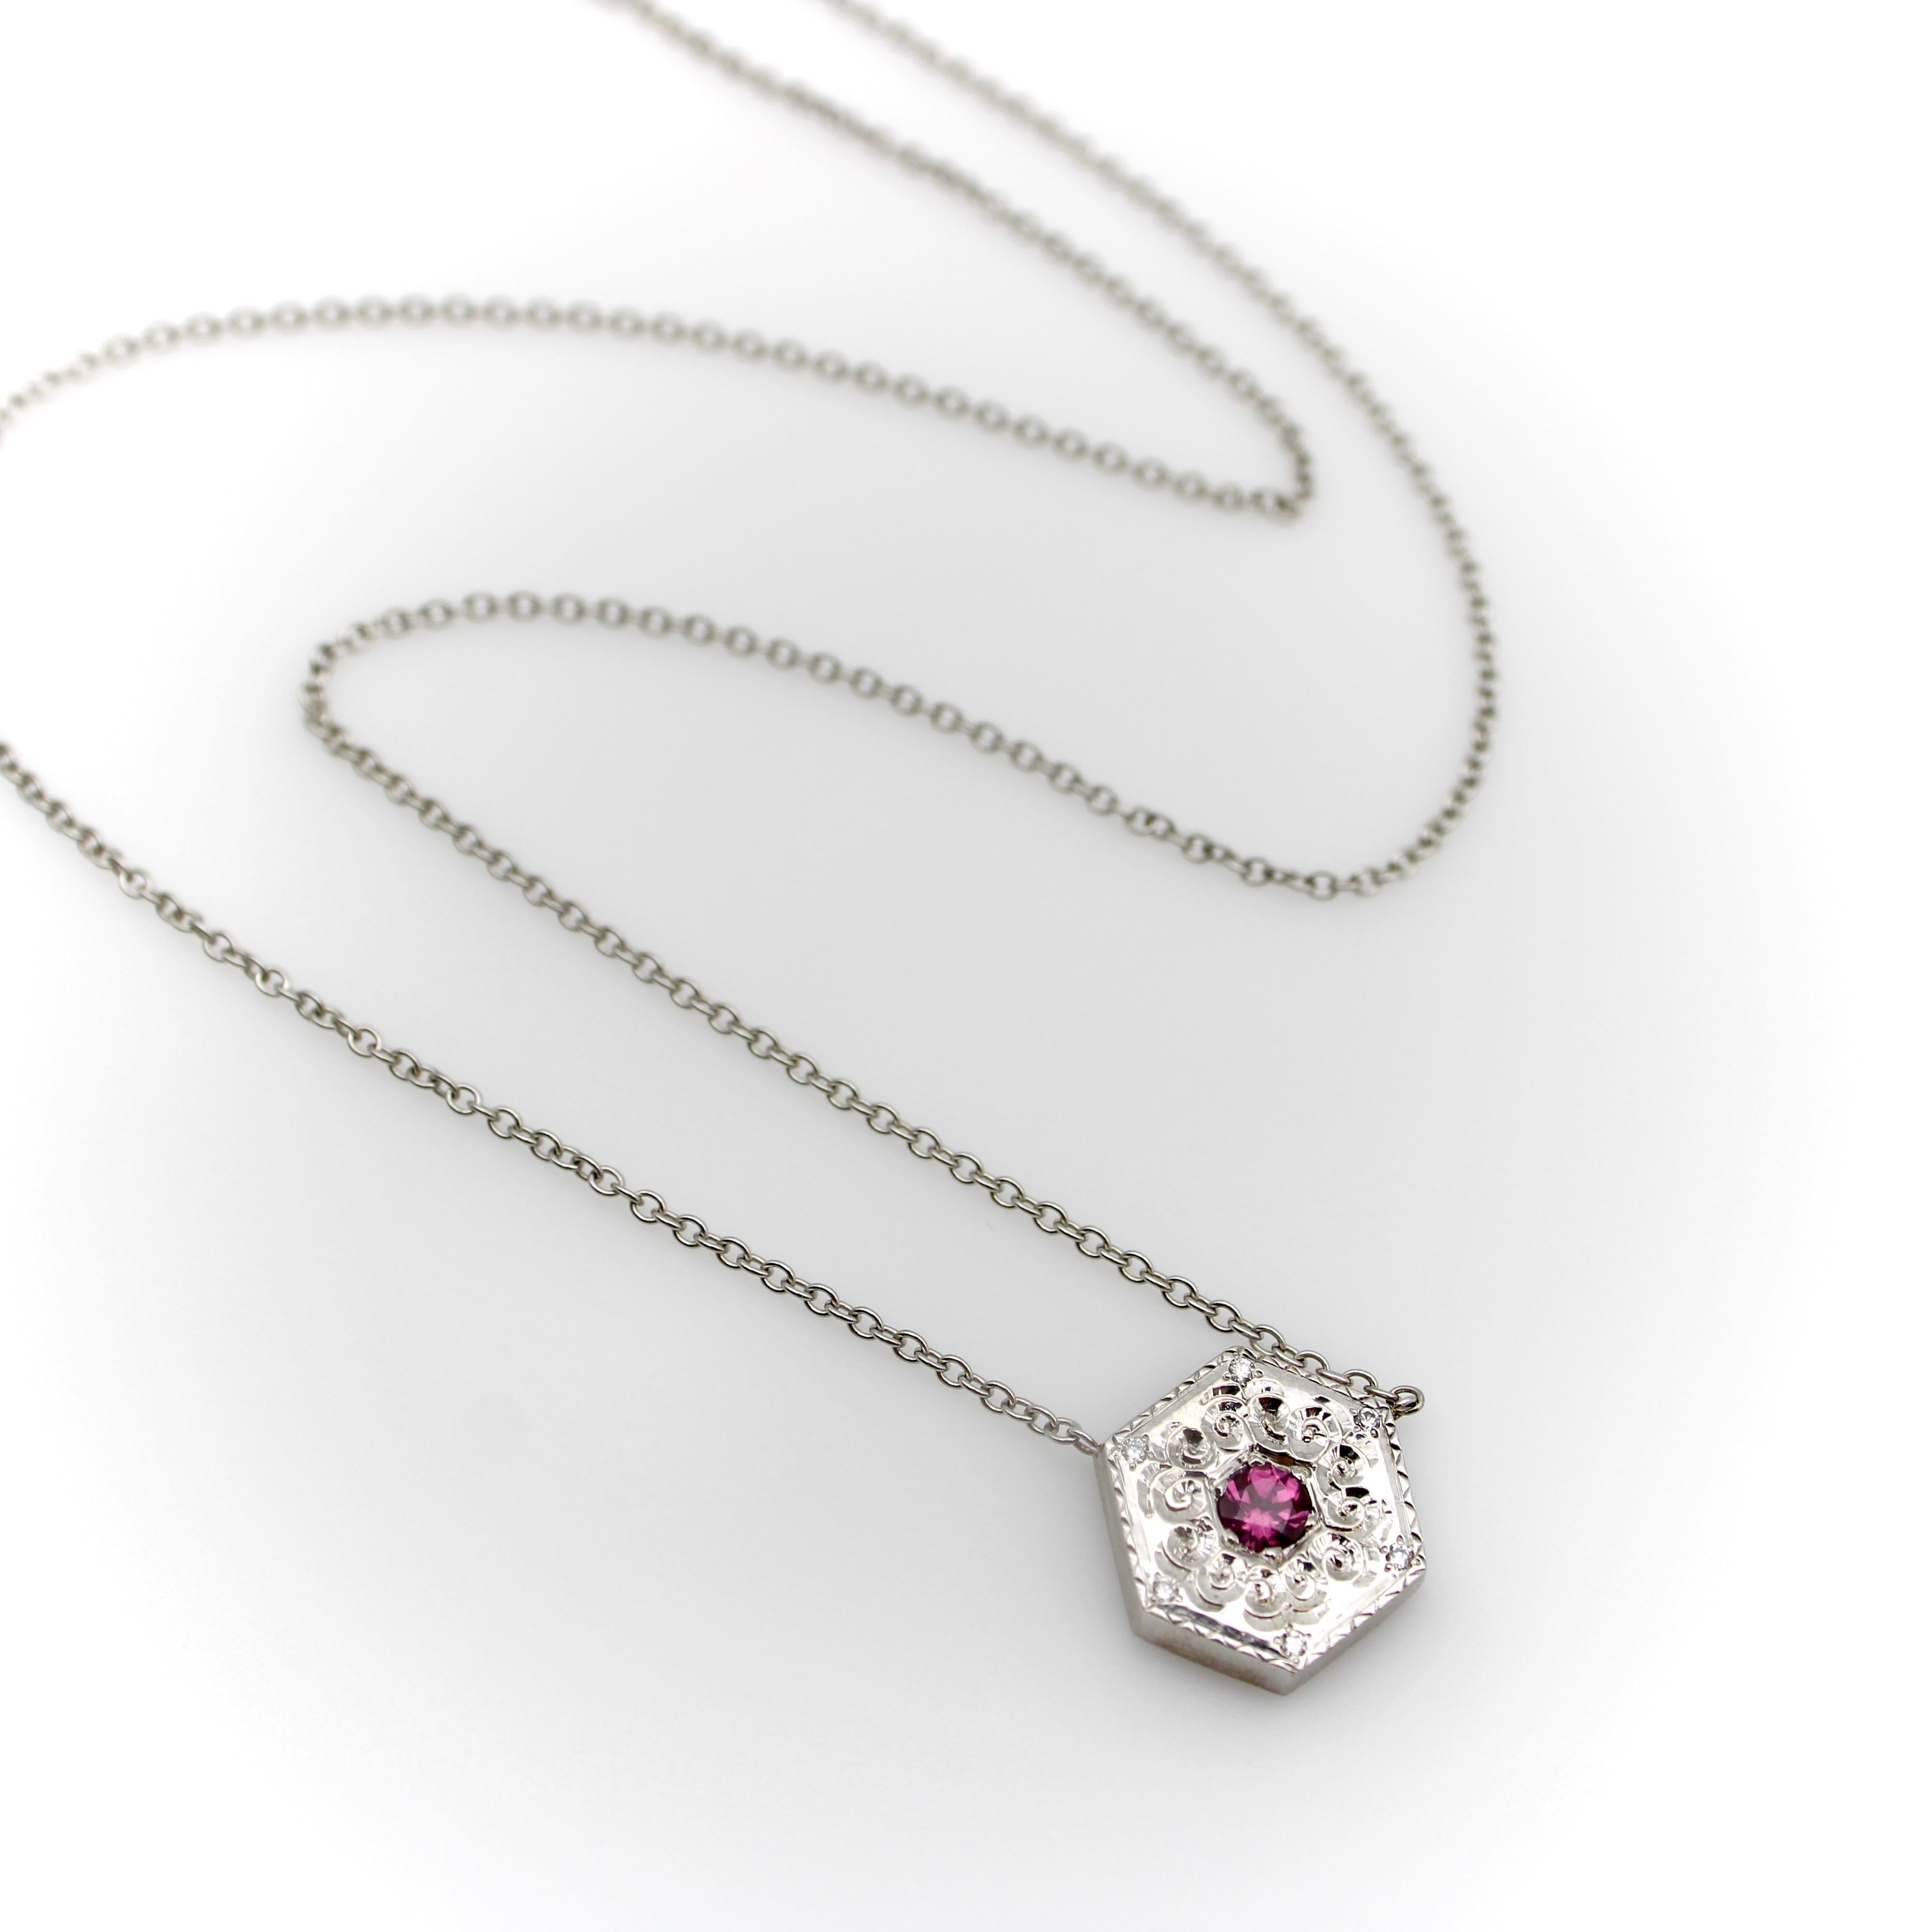 The 14k white gold medallion necklace is a one-of-a-kind piece, hand-engraved by Master Jeweler Michael von Krenner. It its center, a pink tourmaline sparkles against the white gold backdrop. The stone is bead set, surrounded by a motif of